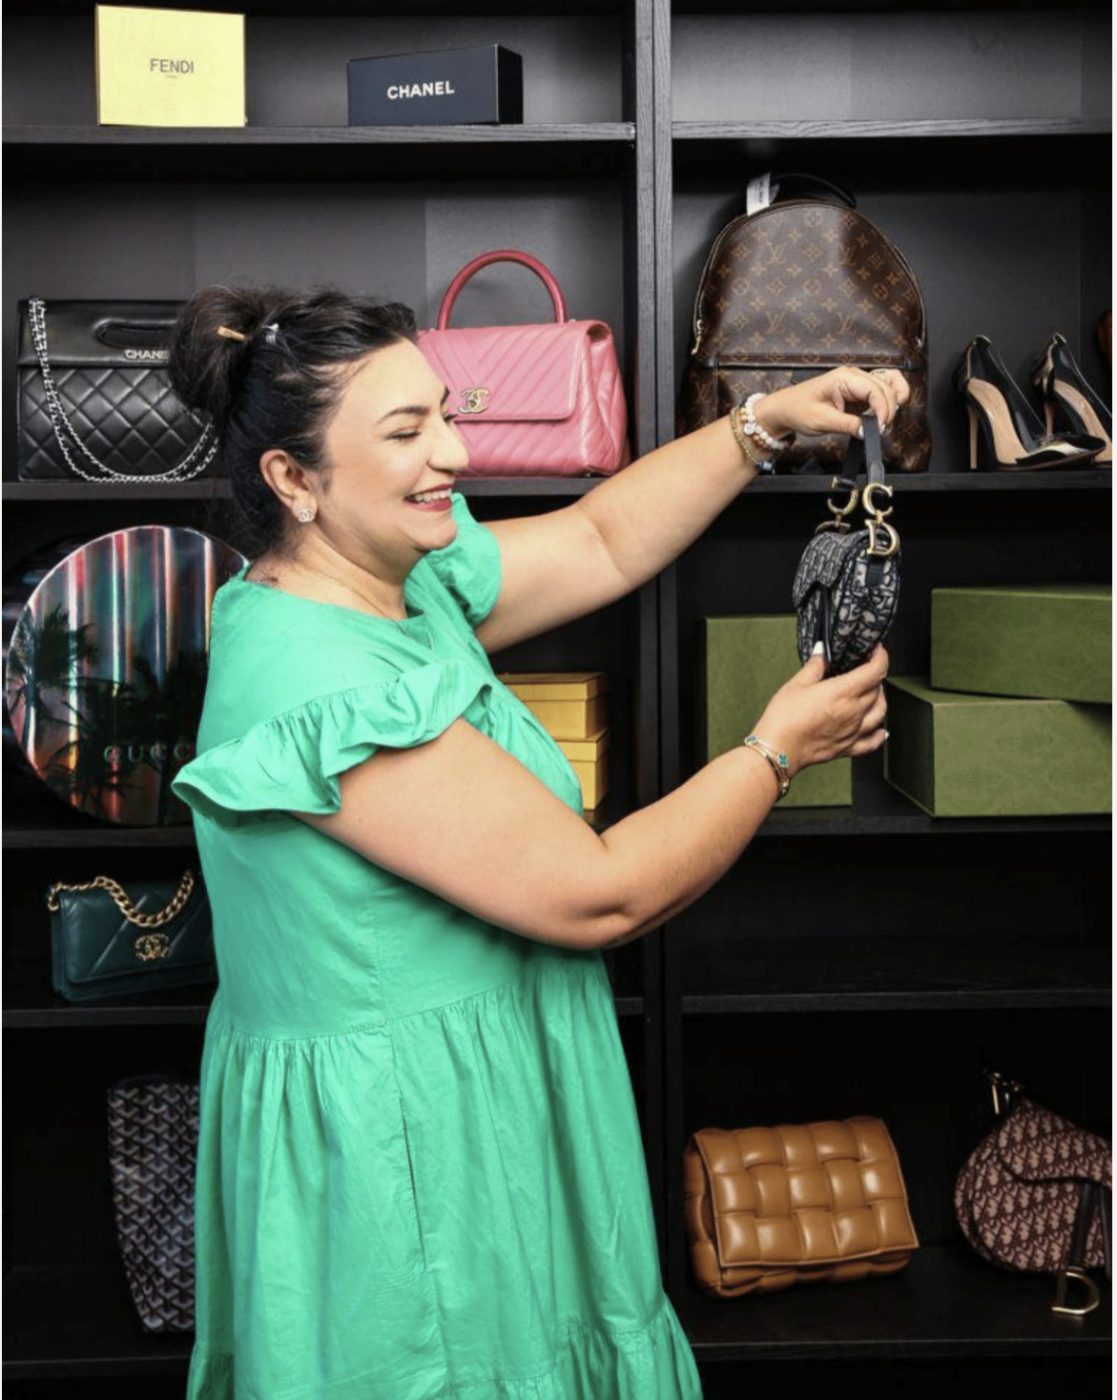  Aqila Agha's luxury boutique, Papillonkia, specializes in pre-owned designer handbags and accessories